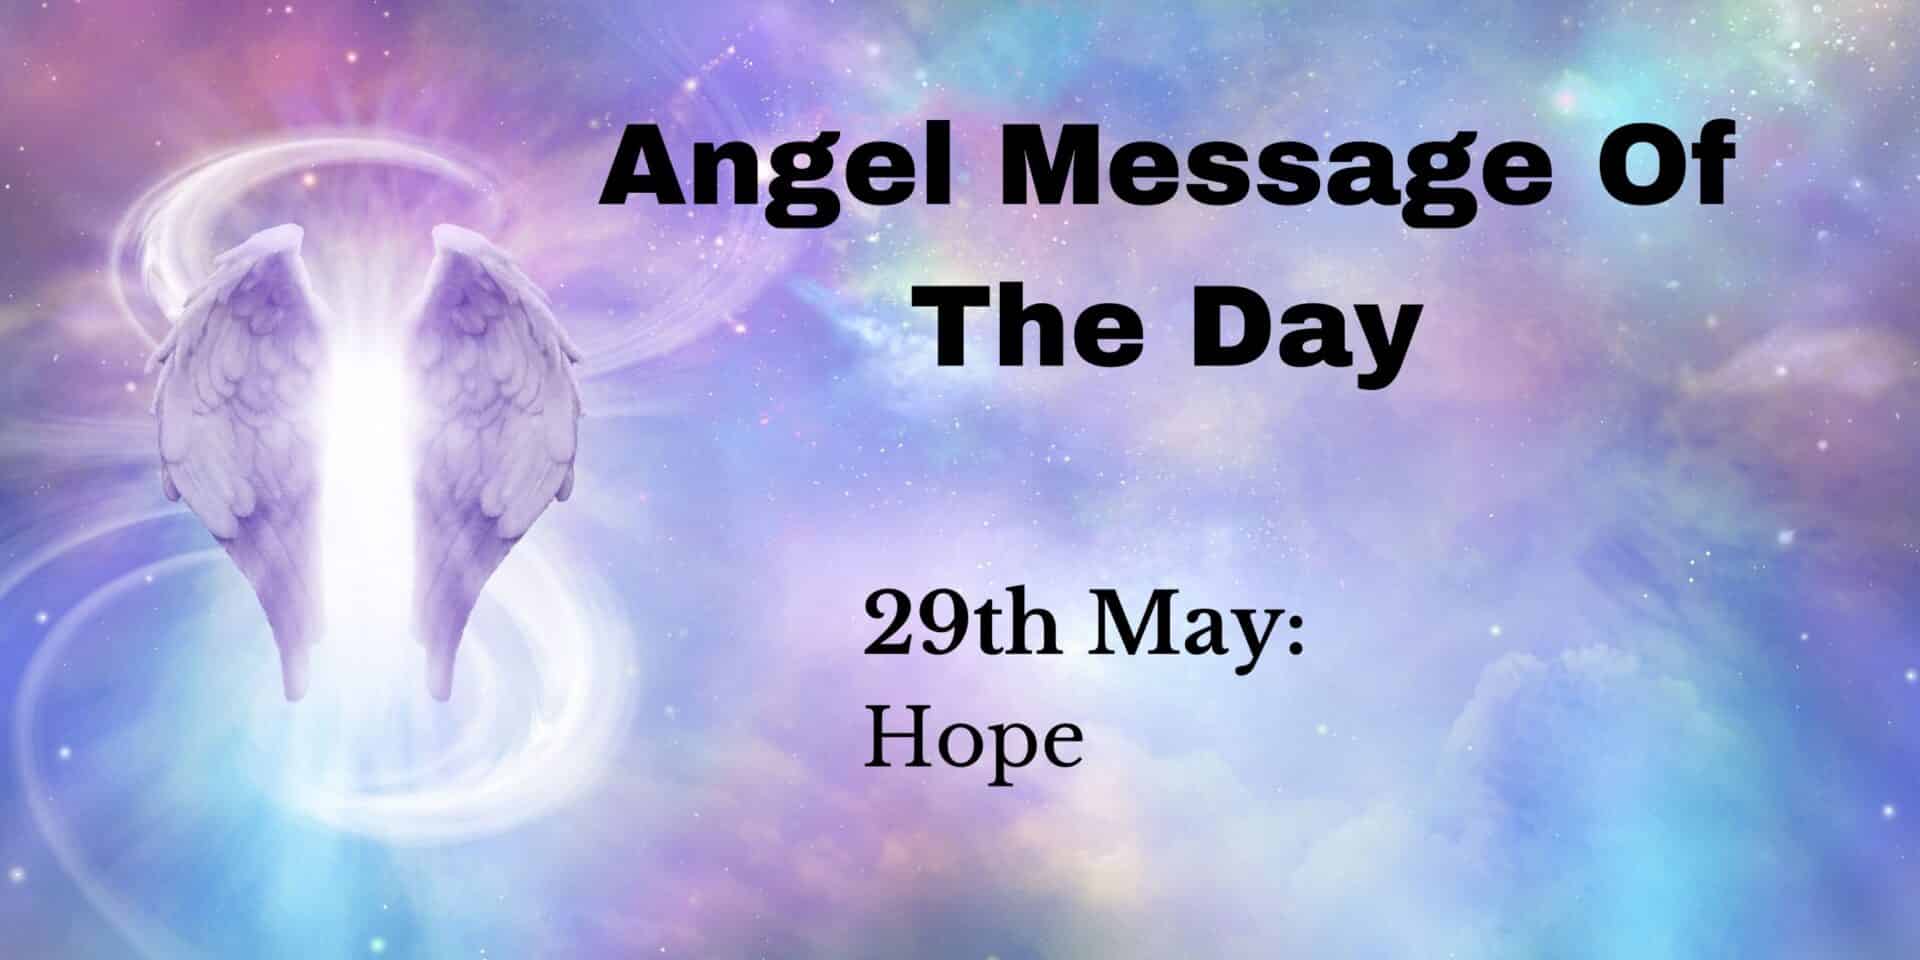 angel message of the day : hope